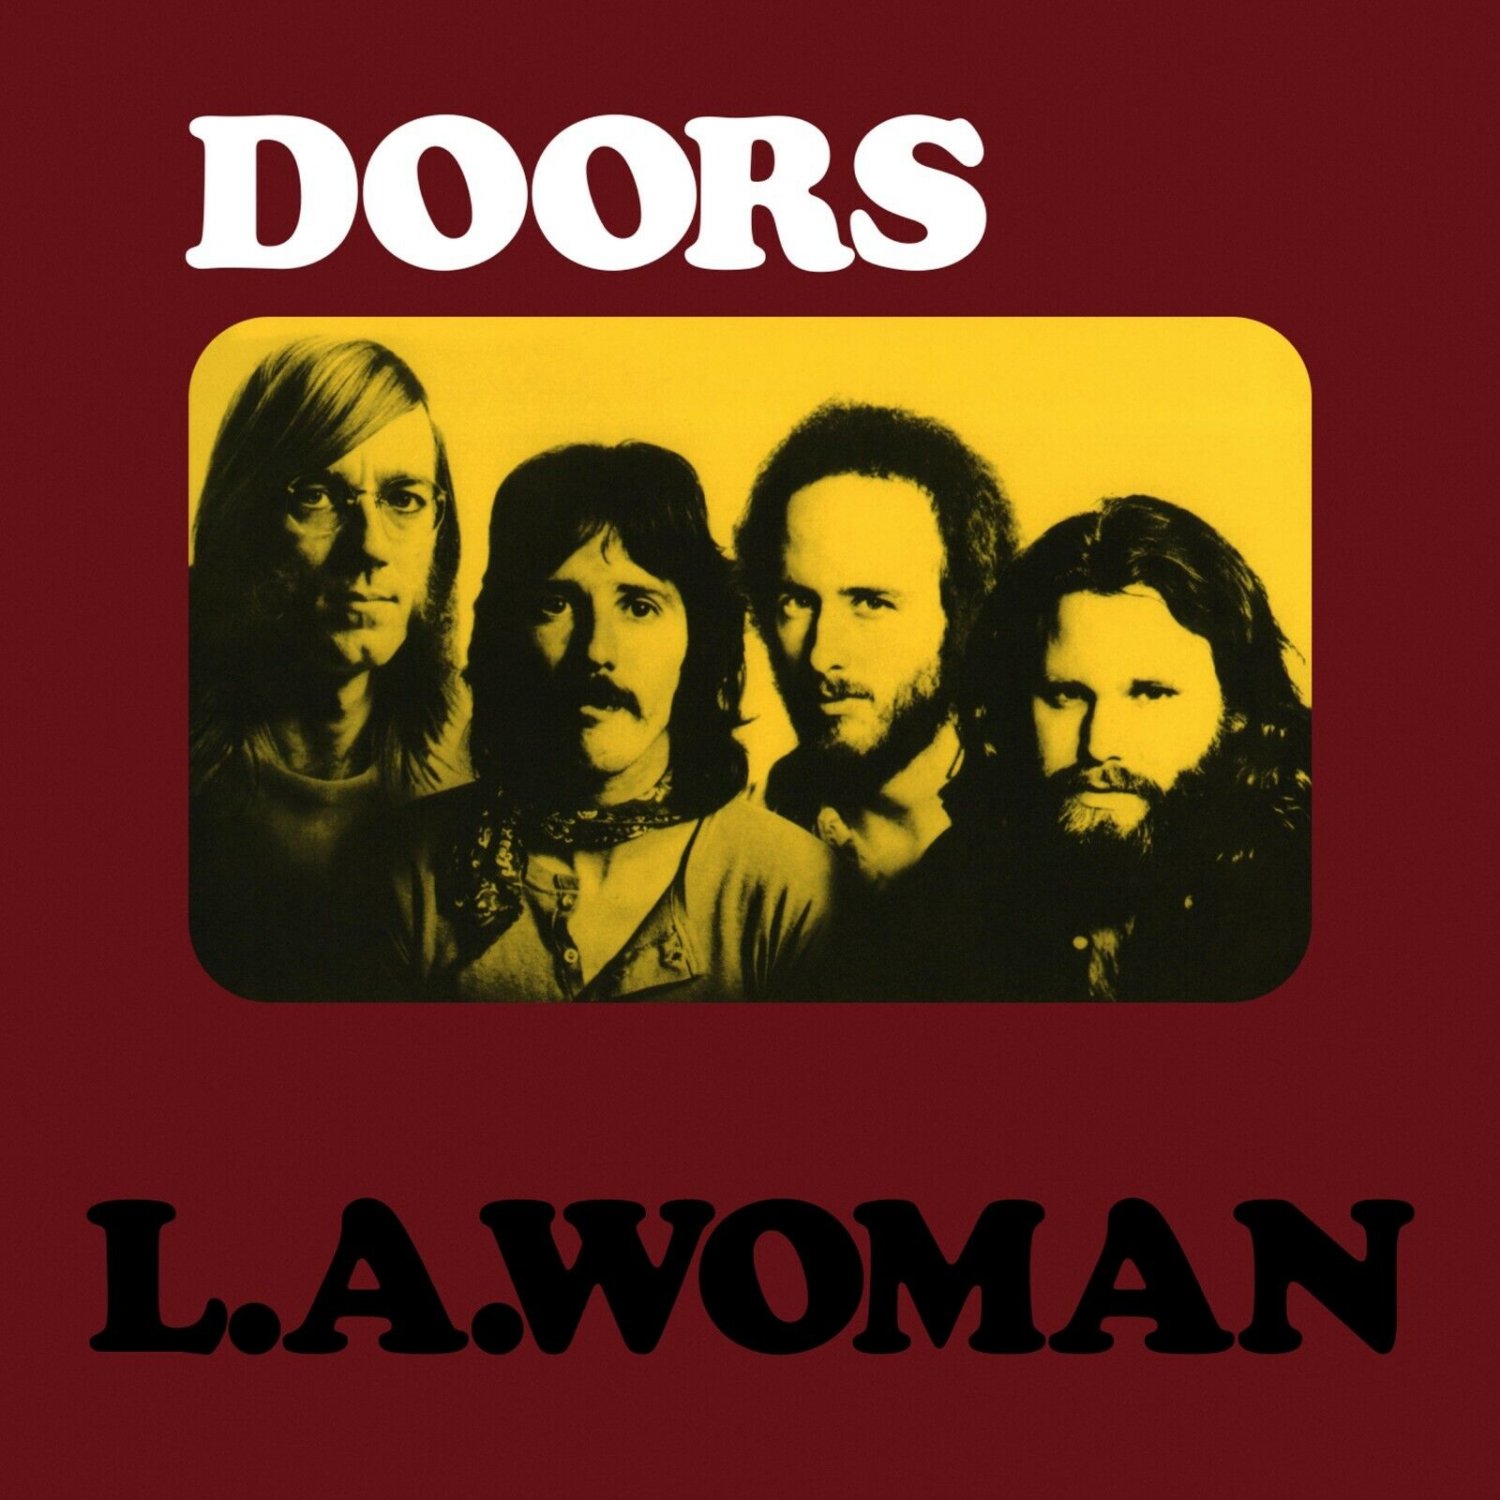 The DOORS L.A. Woman BANNER 3x3 Ft Fabric Poster Tapestry Flag album cover art